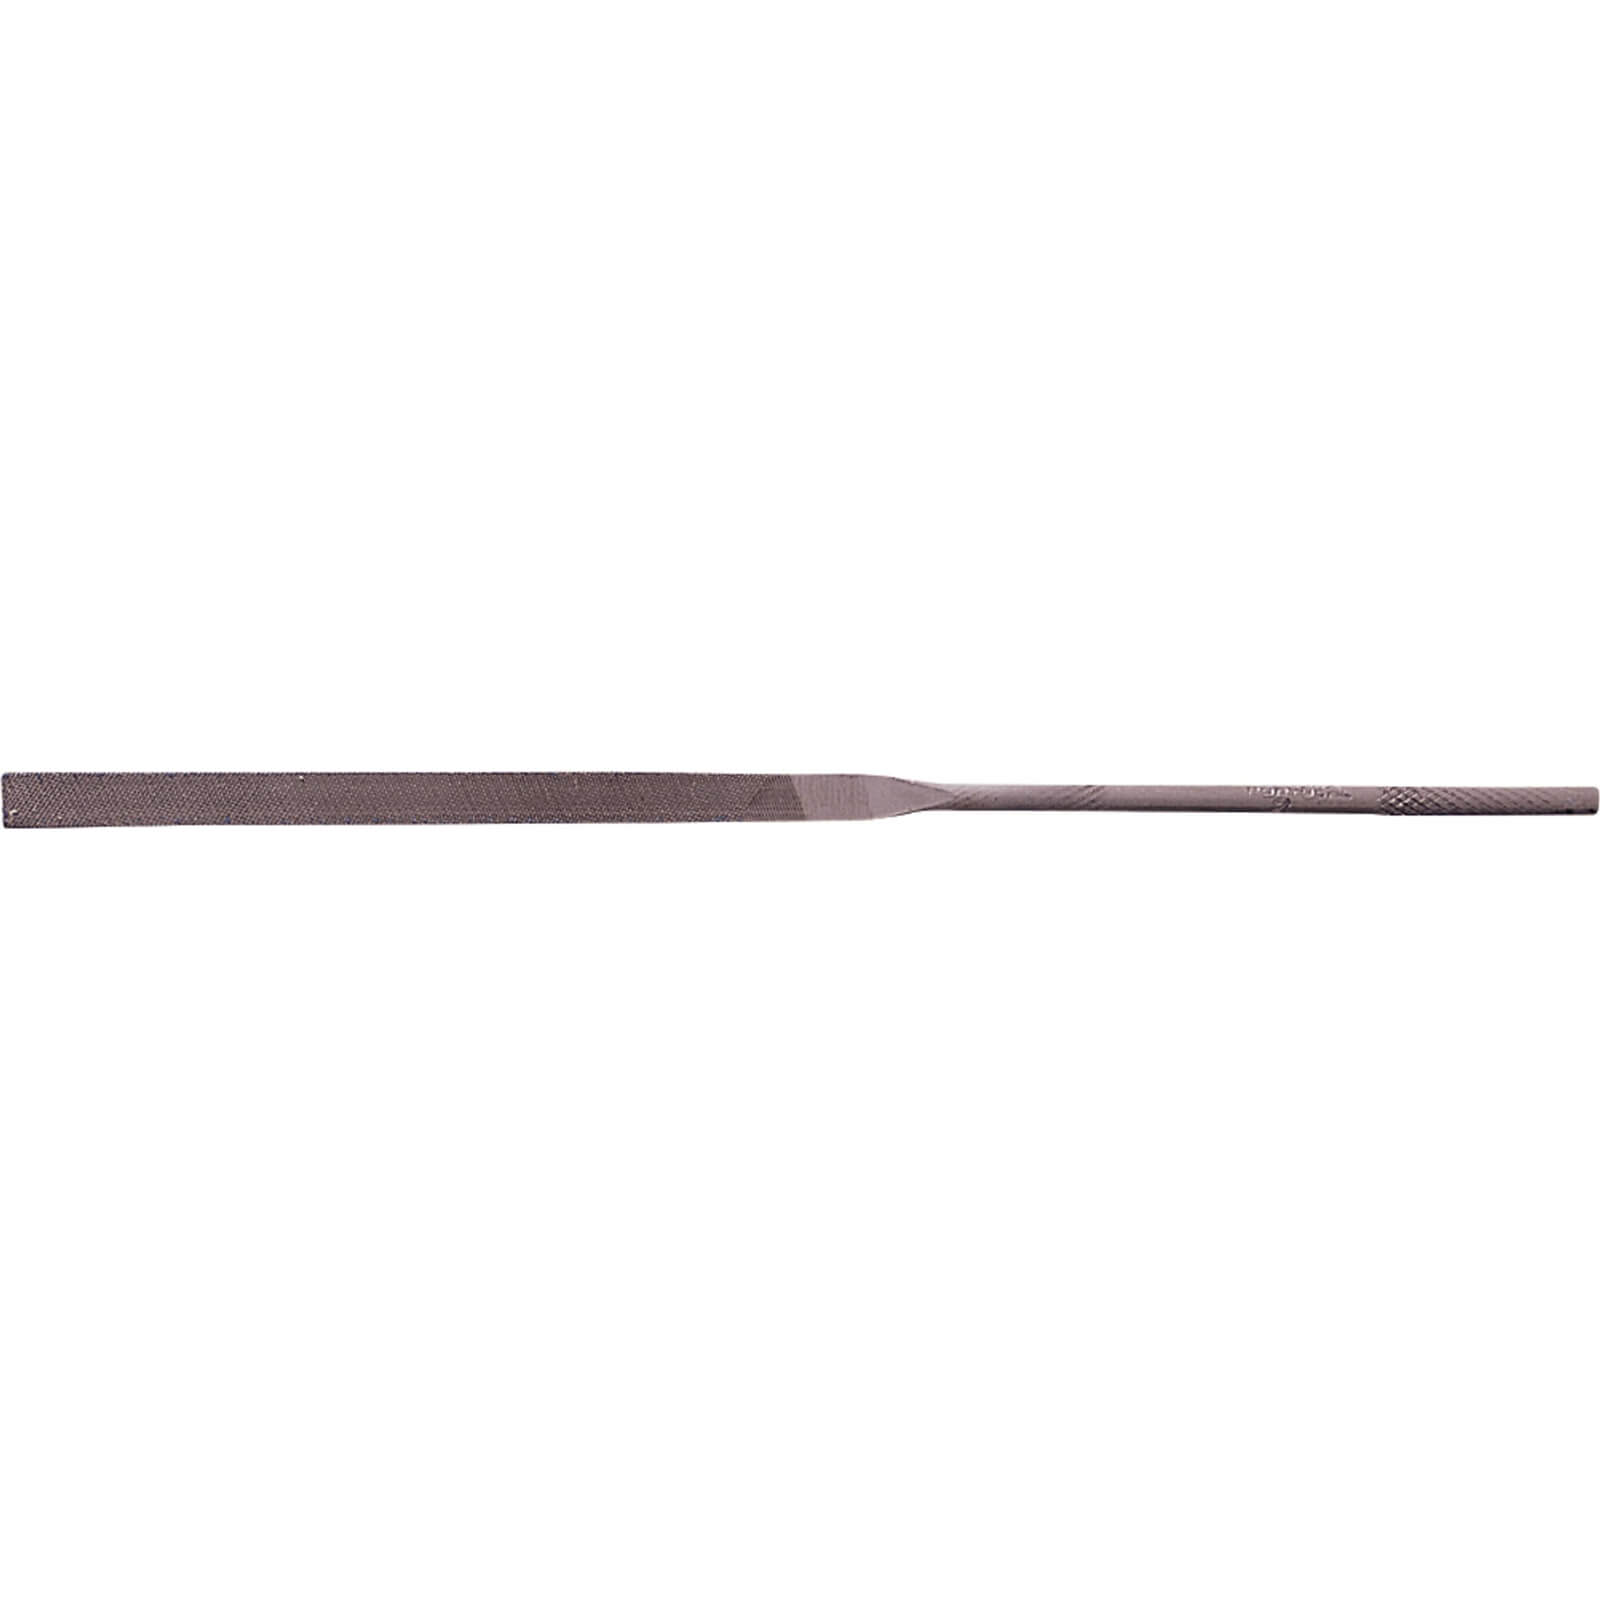 Image of Draper Flat Parallel Needle File 160mm No 2 Pack of 12